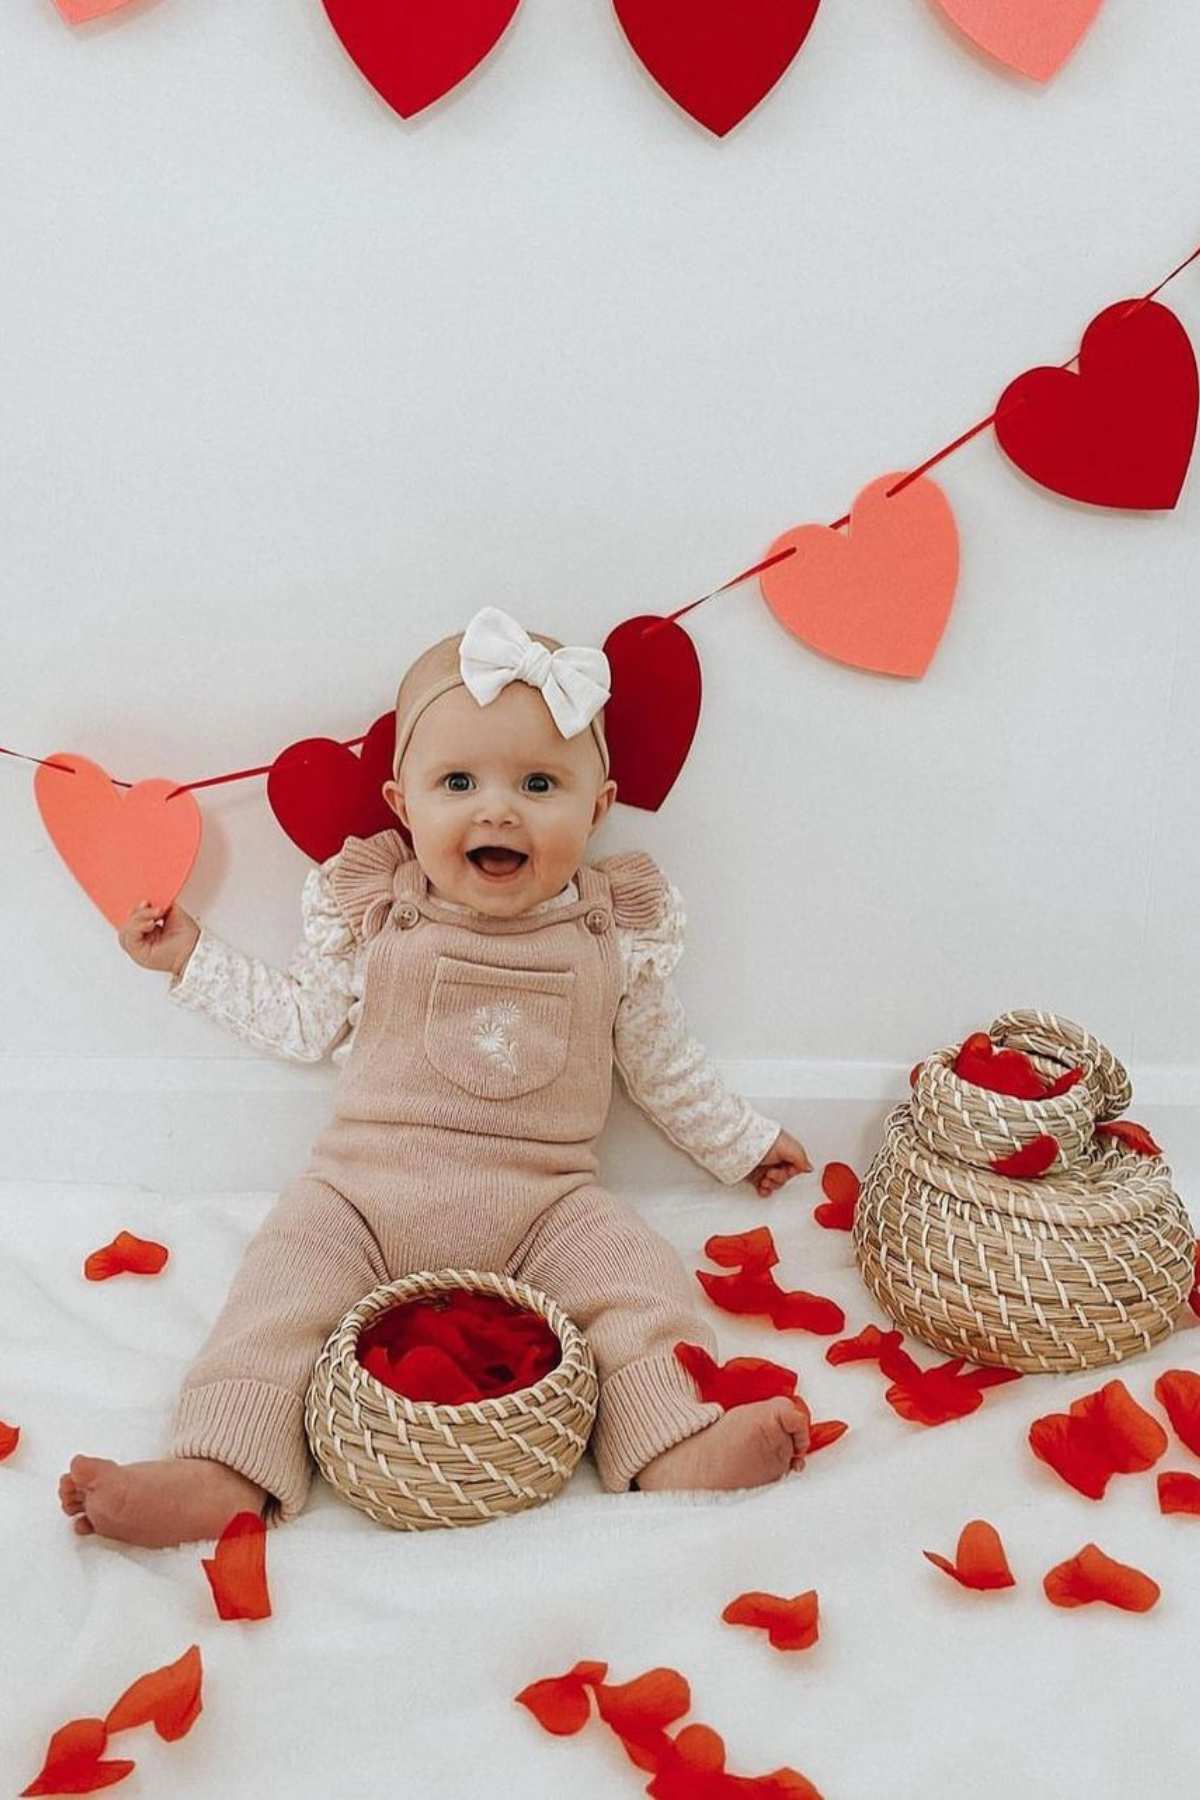 A baby sitting on the floor with hearts and baskets.